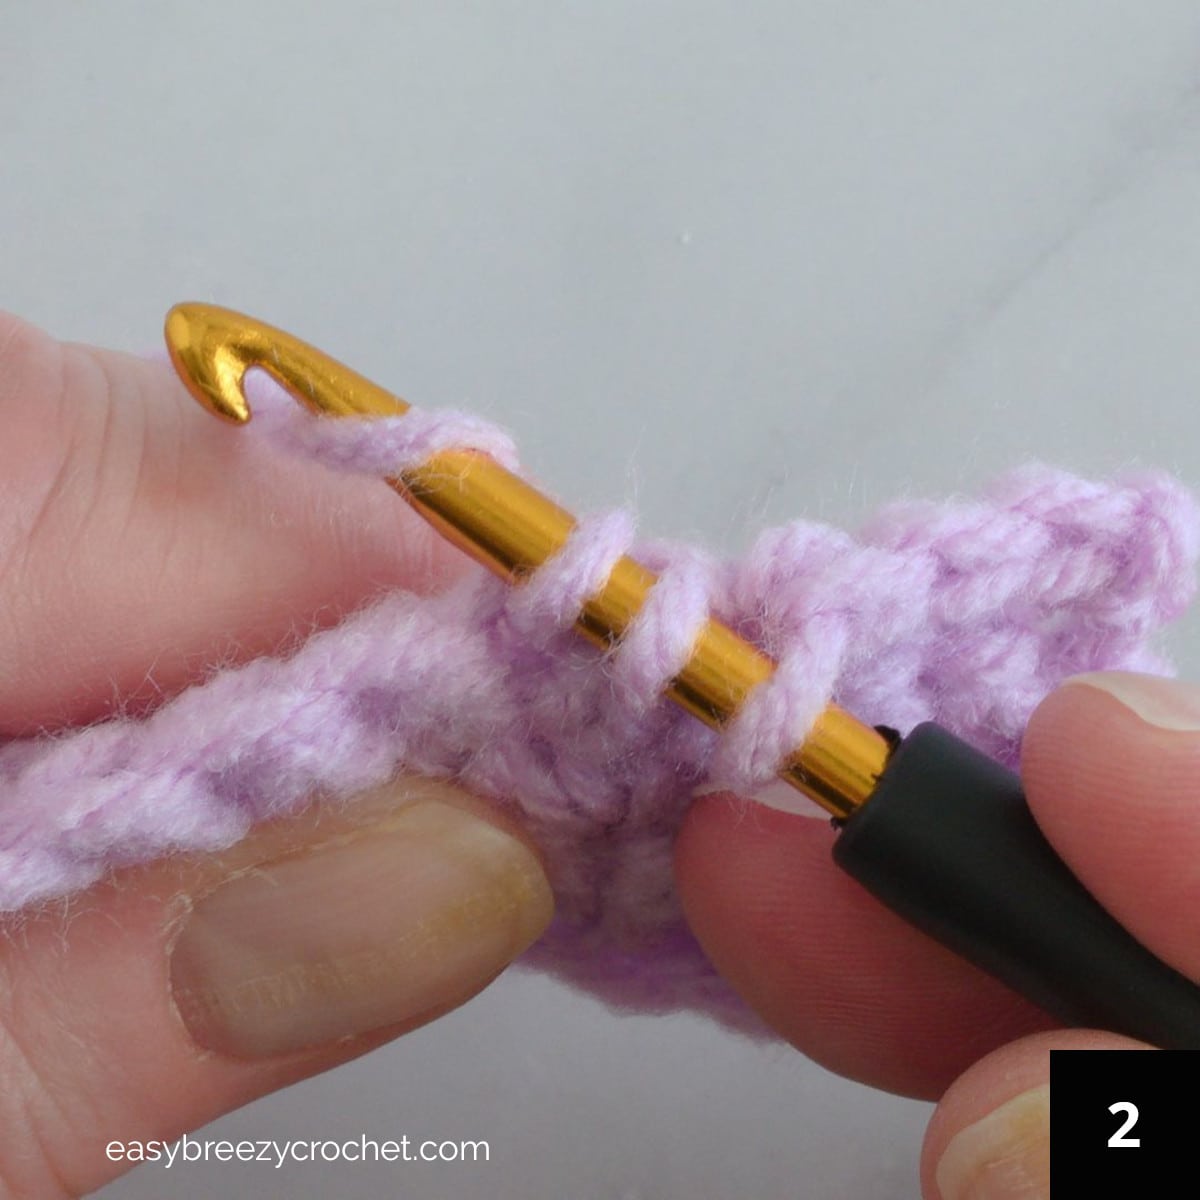 Step two of how to make a single crochet decrease.